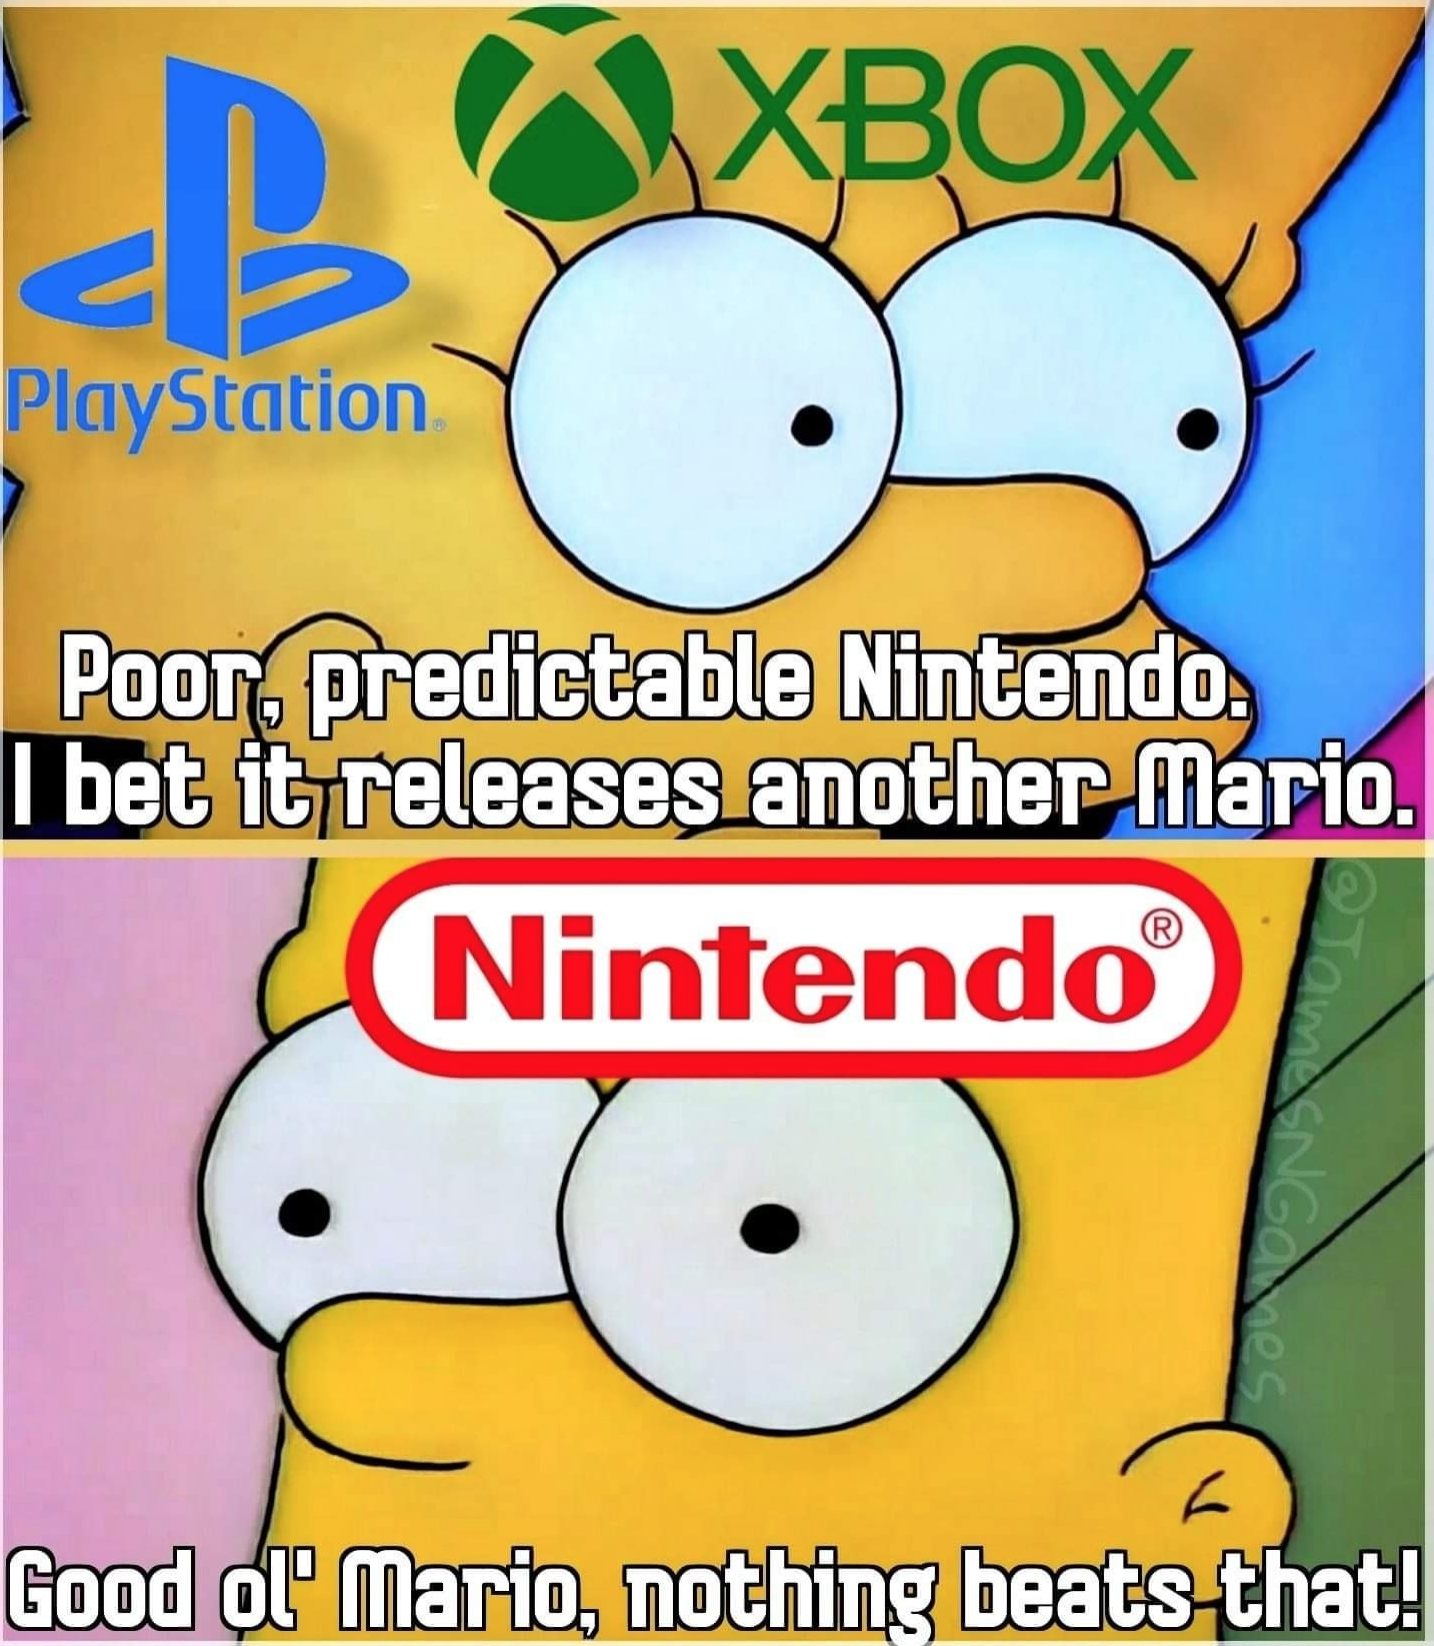 funny gaming memes - nintendo apple - B. Xbox PlayStation Poor predictable Nintendo I bet it releases another Mario. Nintendo Good ol' Mario, nothing beats that!